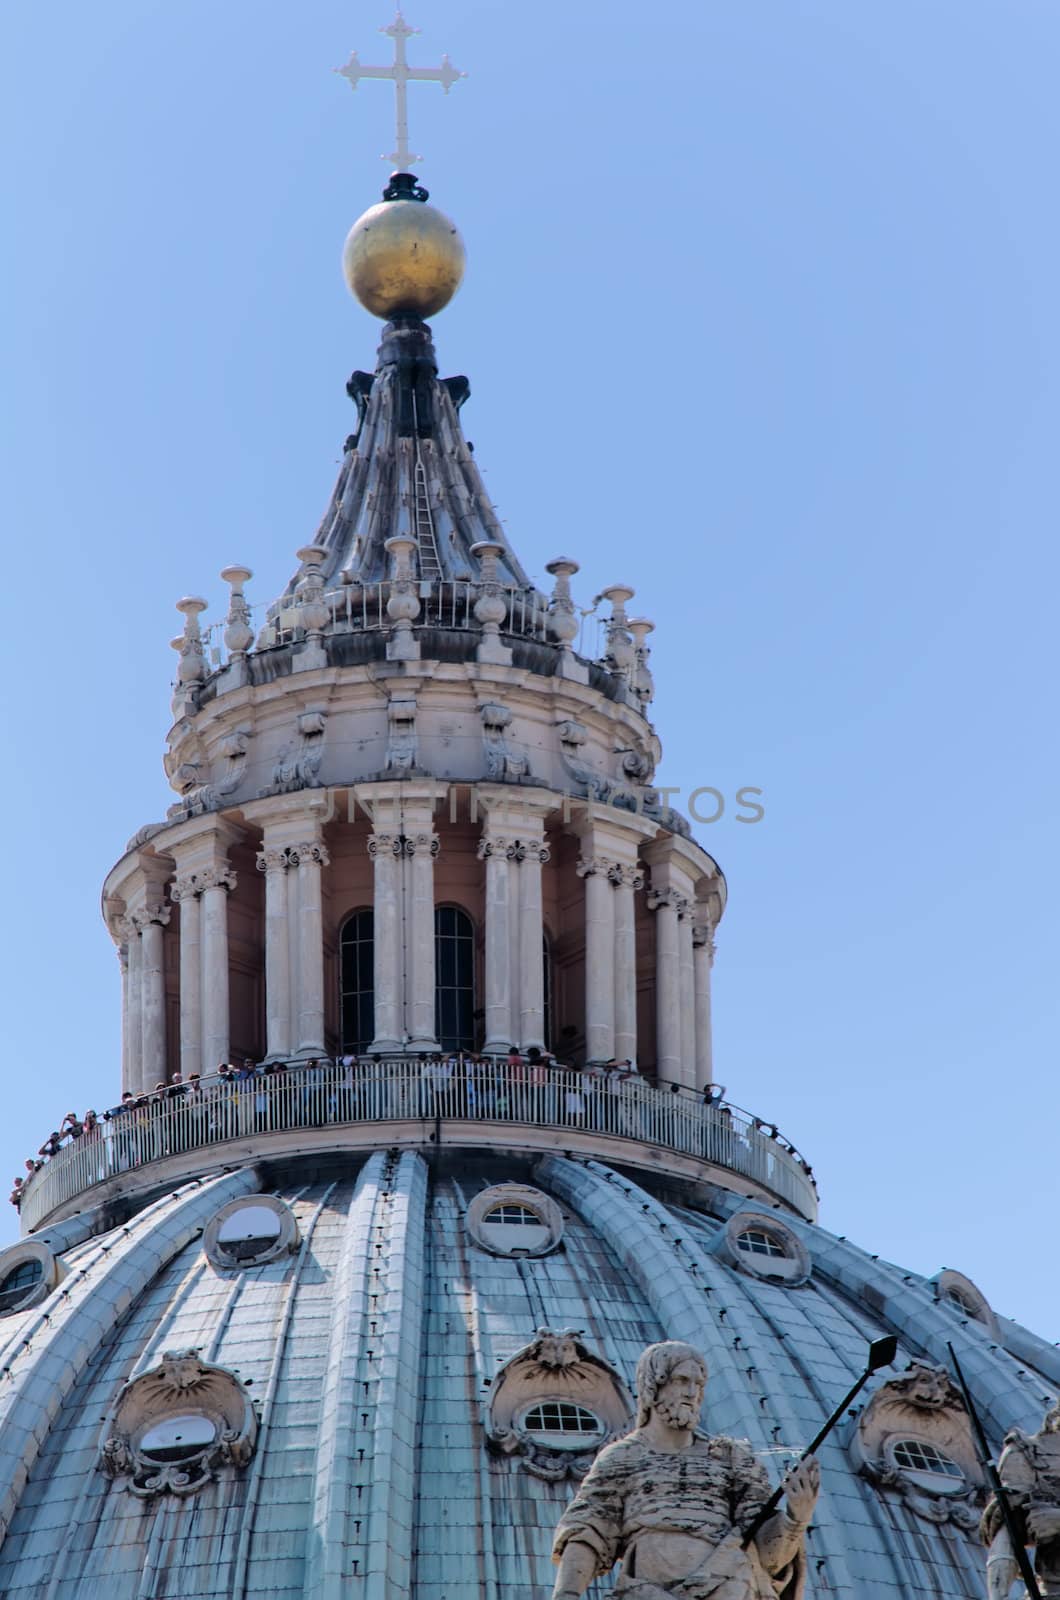 the dome of St. Peter in Rome by njaj